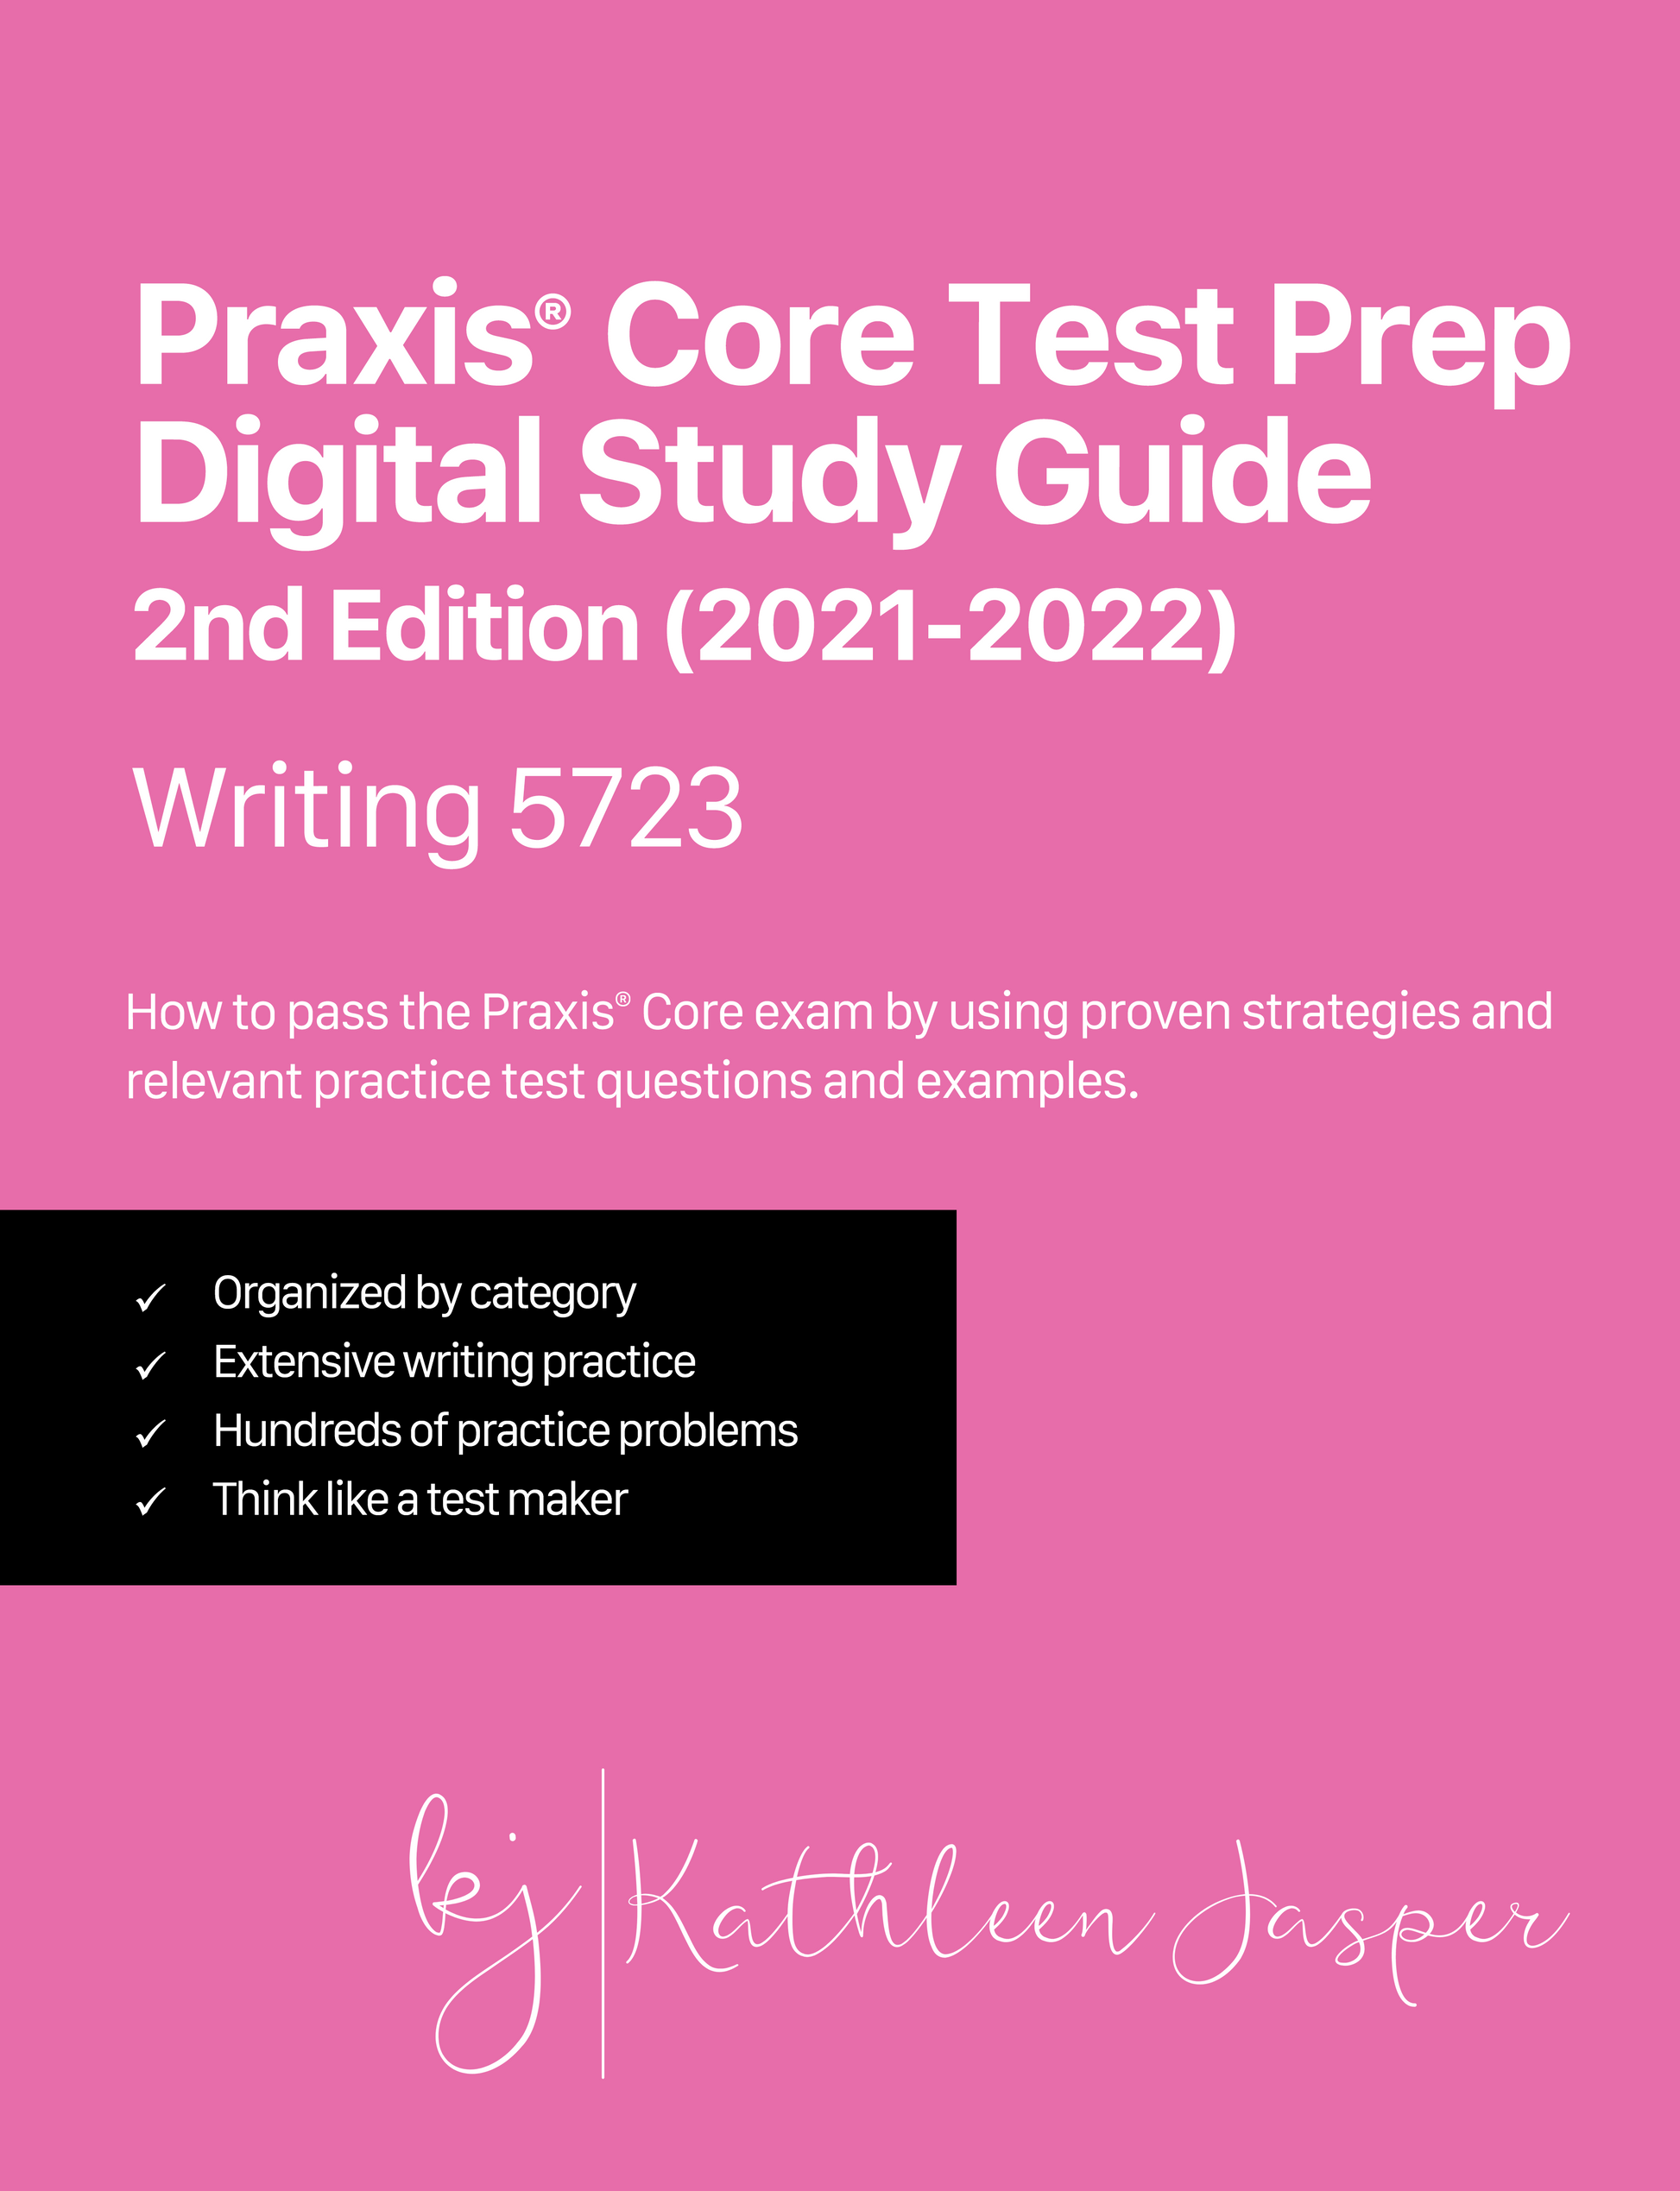 Praxis core test prep digital study guide 2nd edition writing 5723